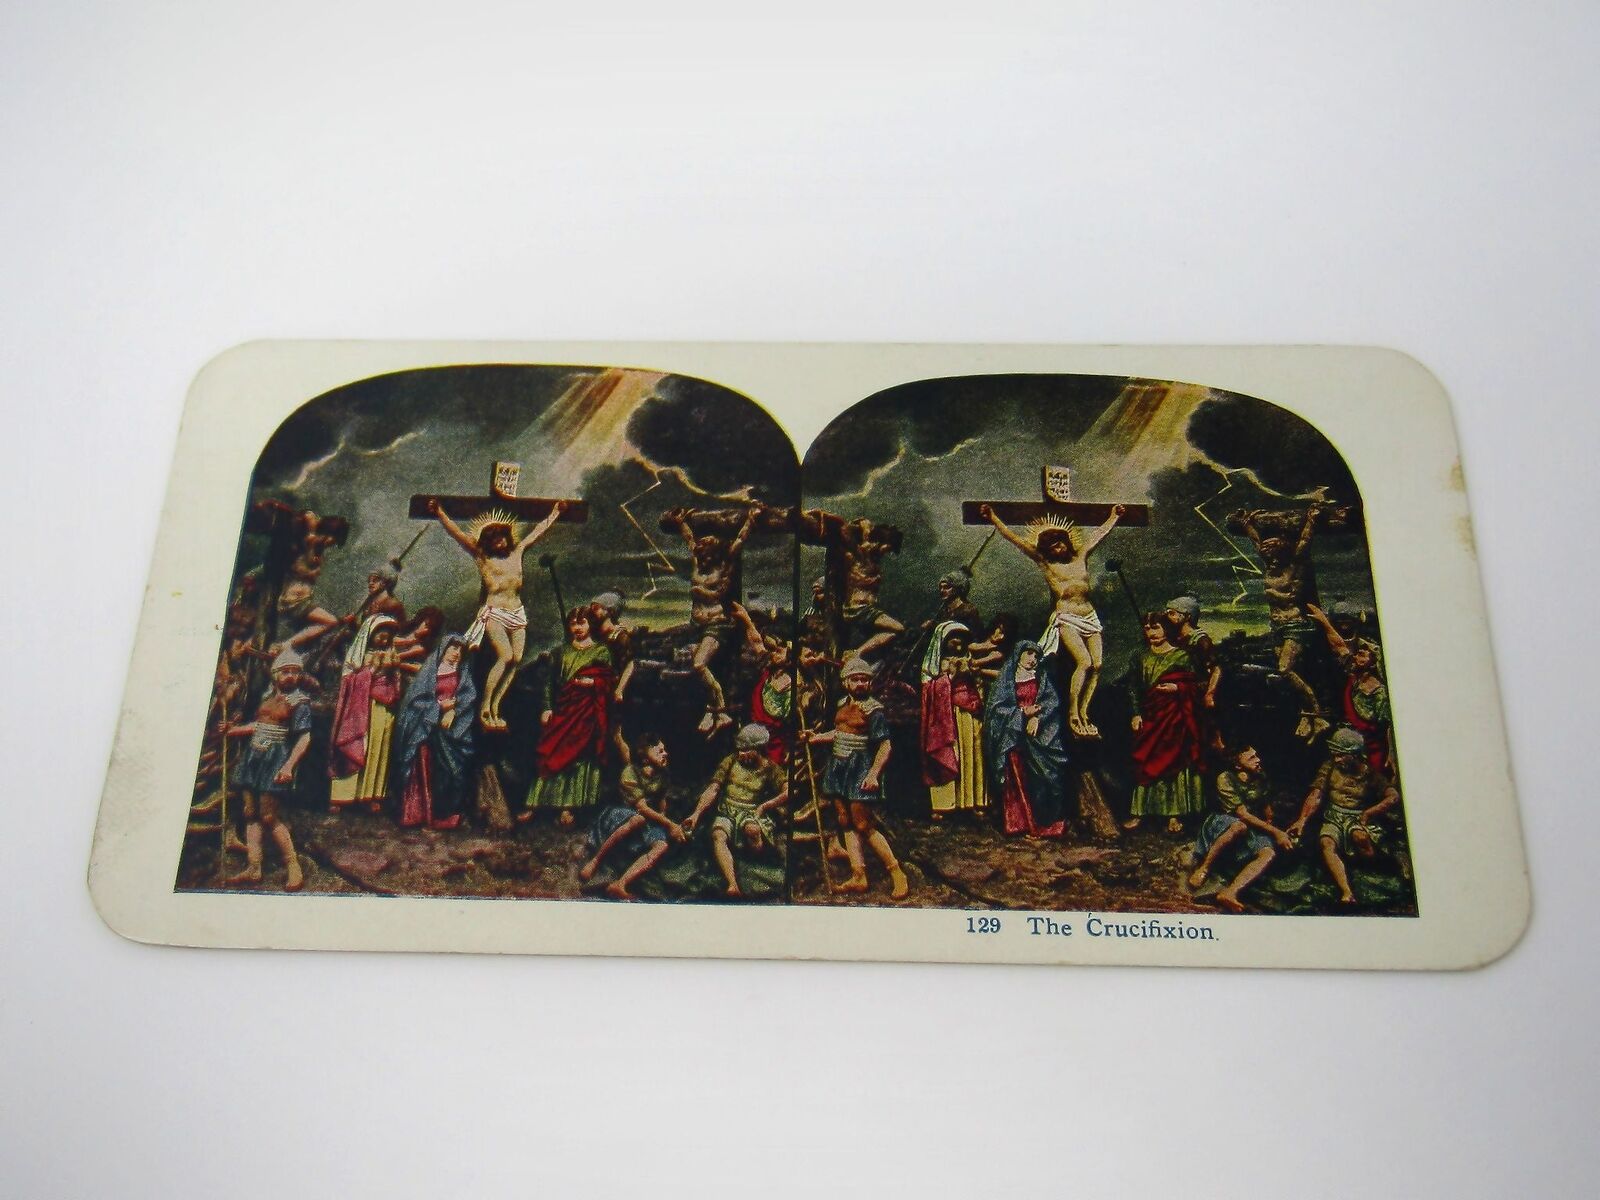 Vintage Christian Postcard Post Card: The Crucifixion